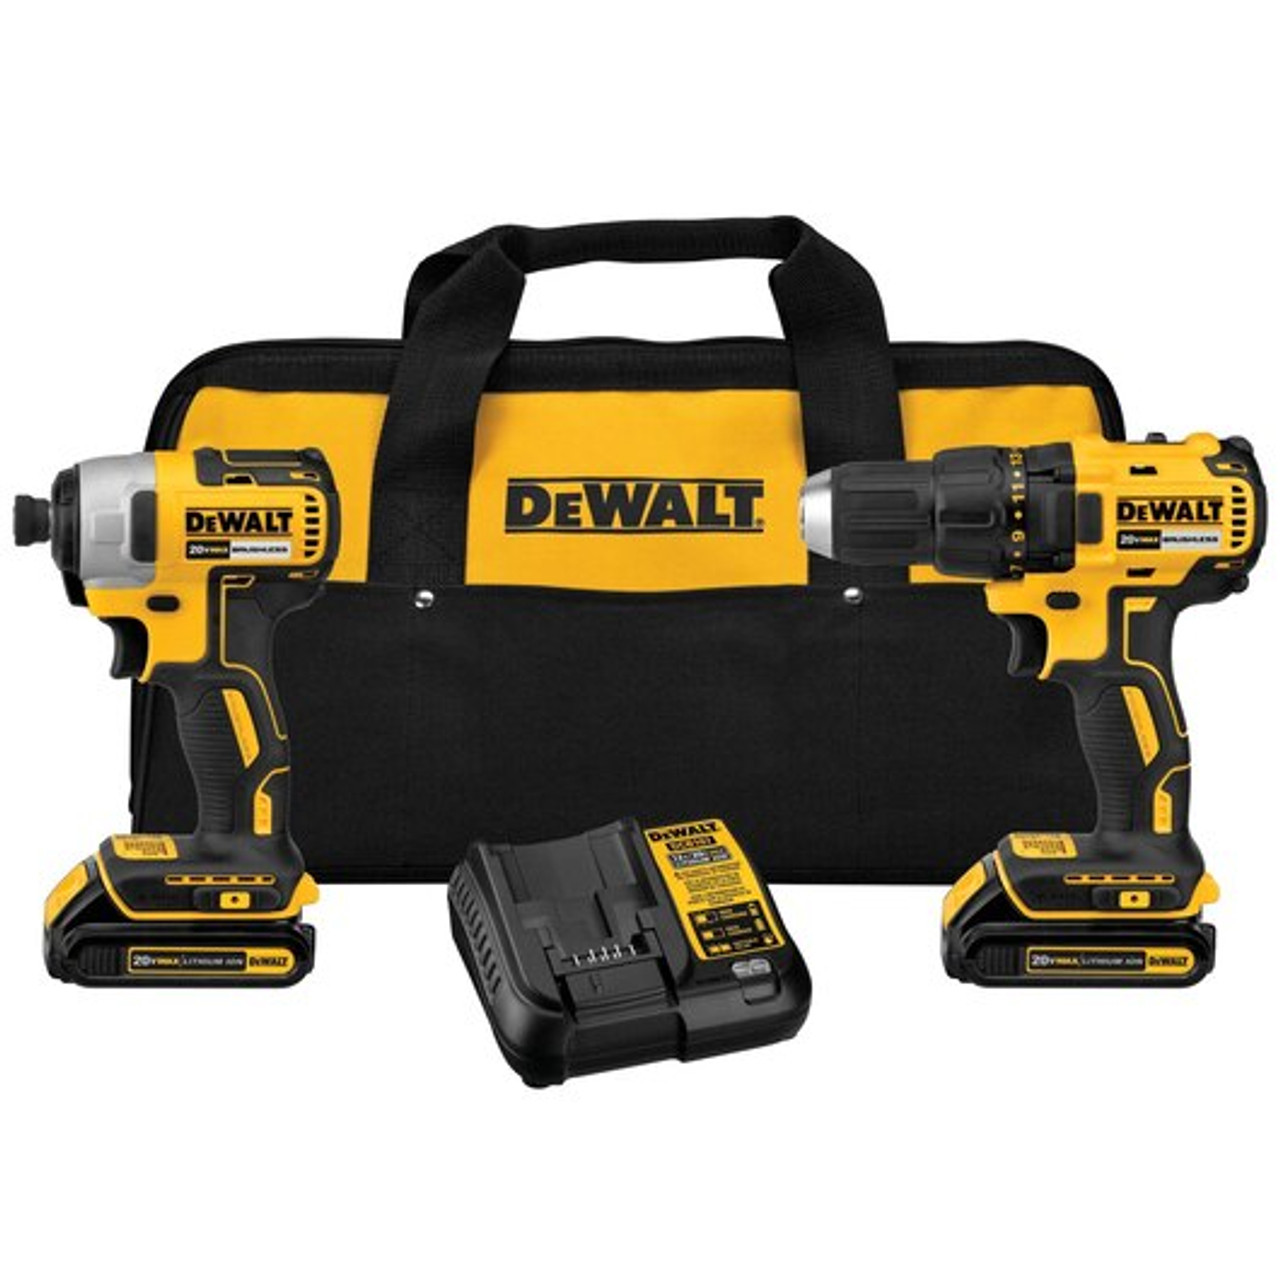 DeWalt 20V MAX Compact Brushless Drill/Driver and Impact Kit (1